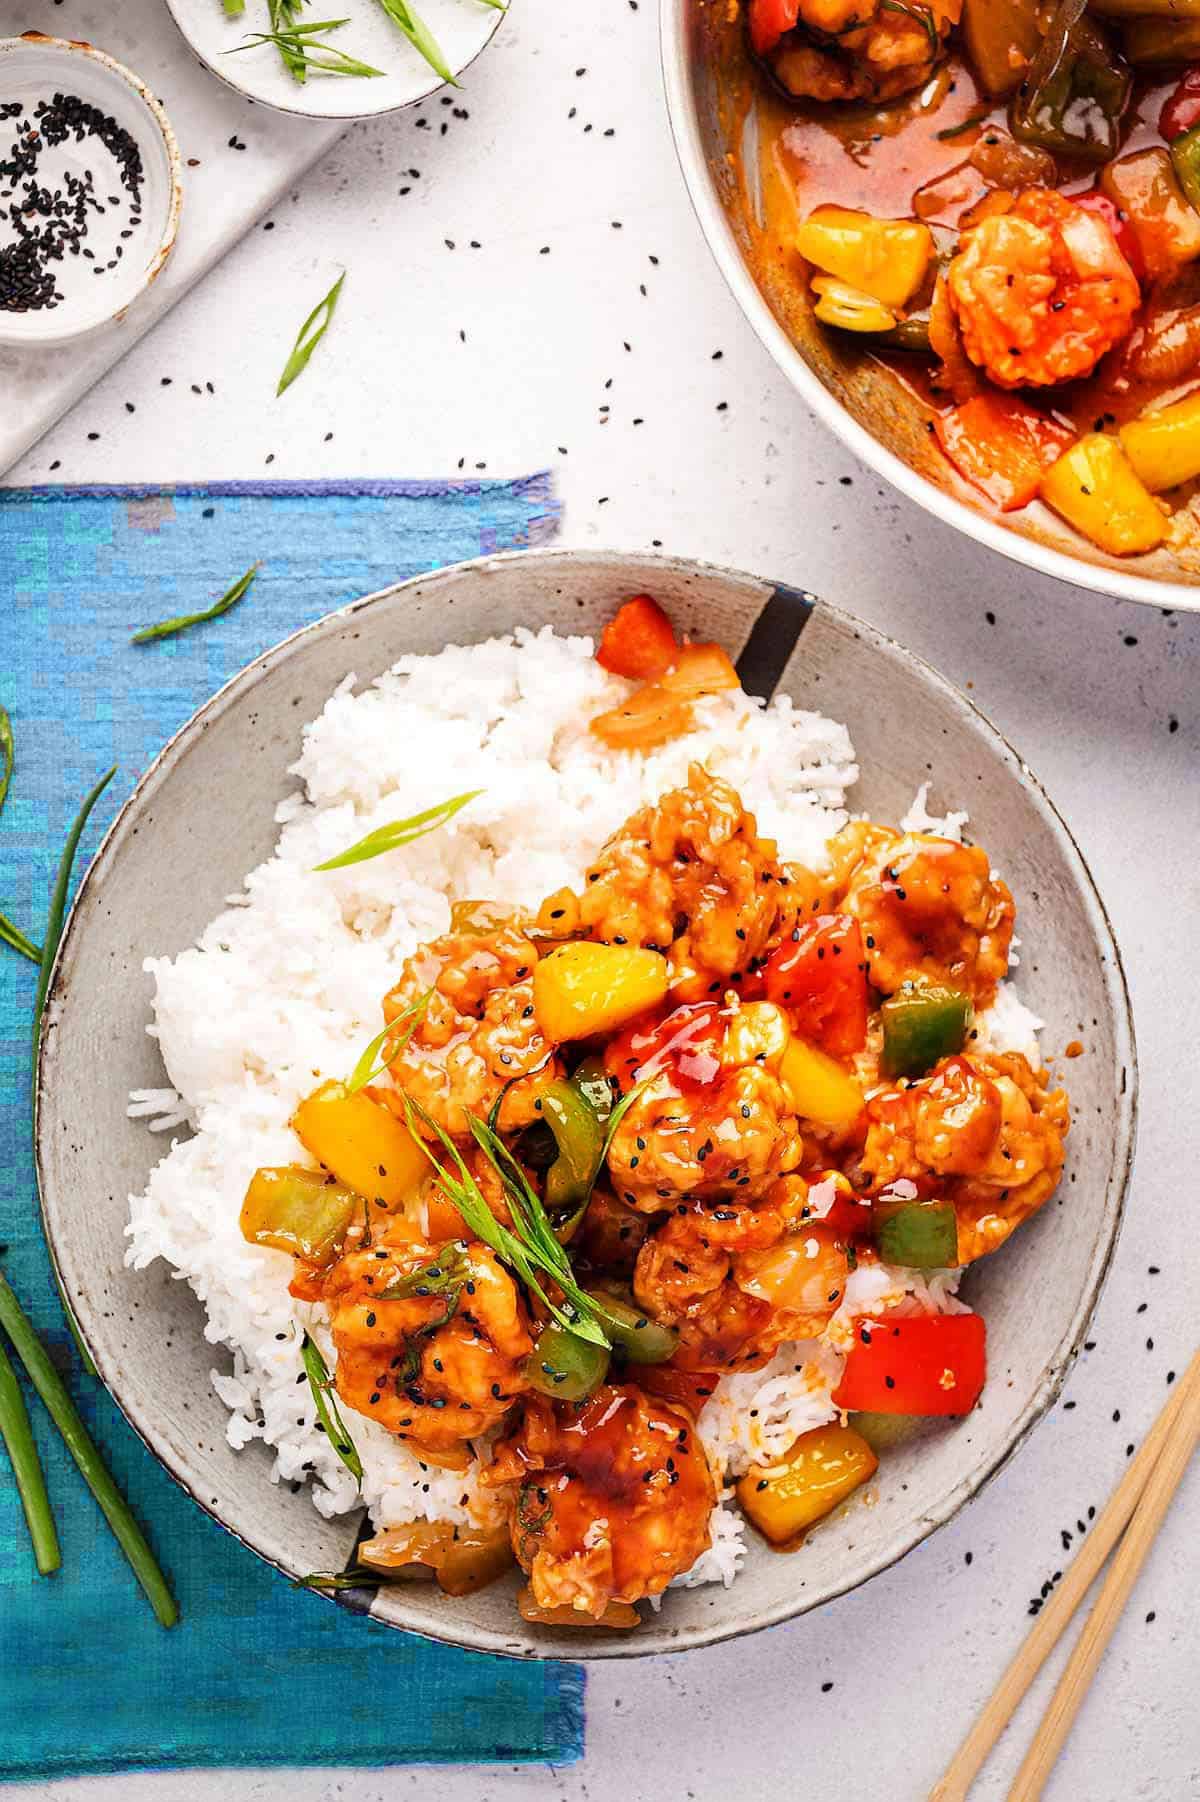 Sweet and sour prawns are served with steamed rice.